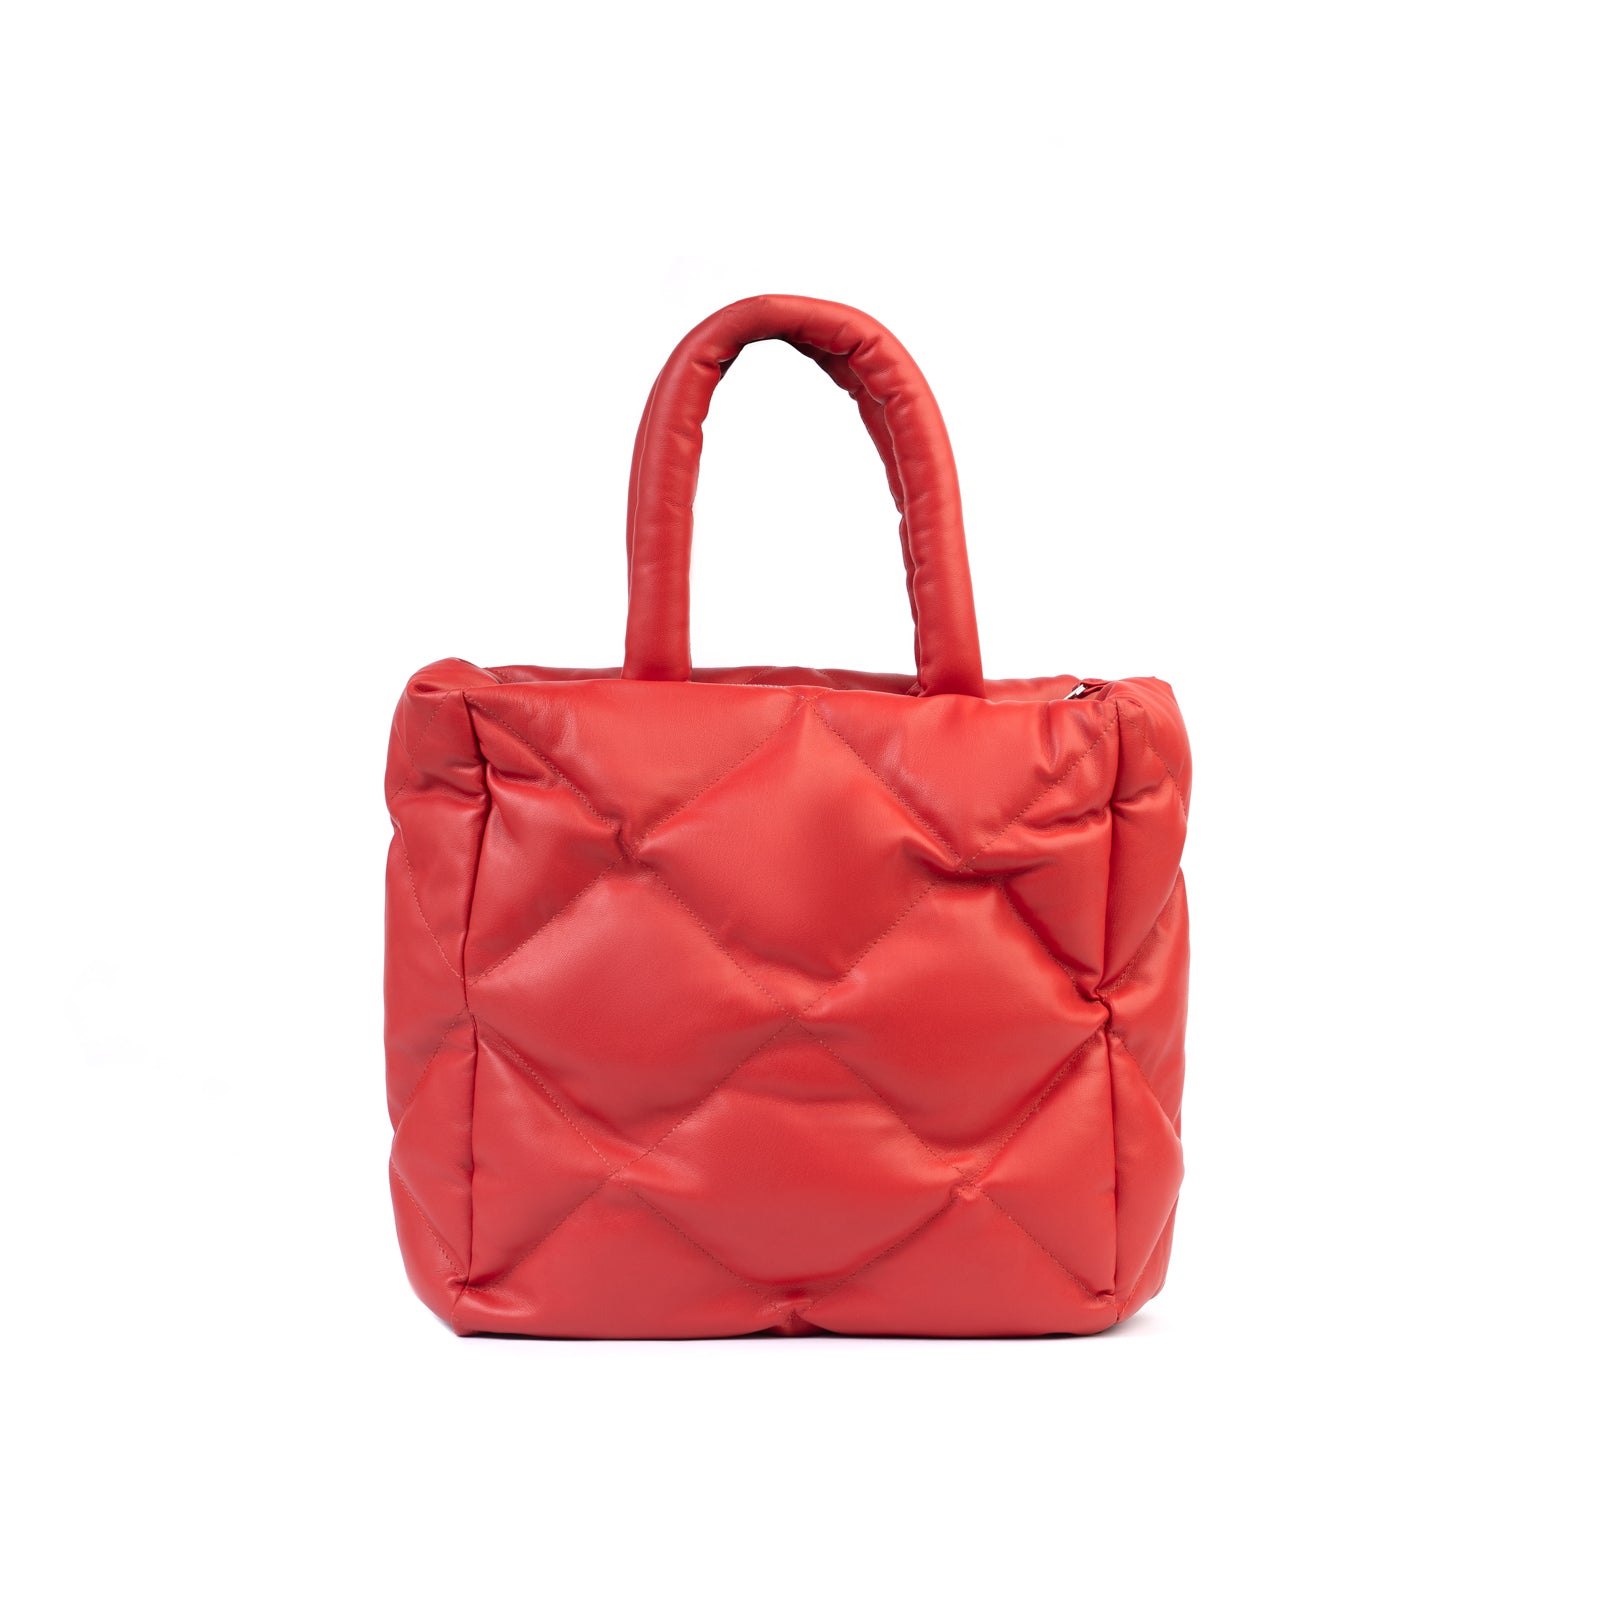 RED QUILTED TOTE BAG